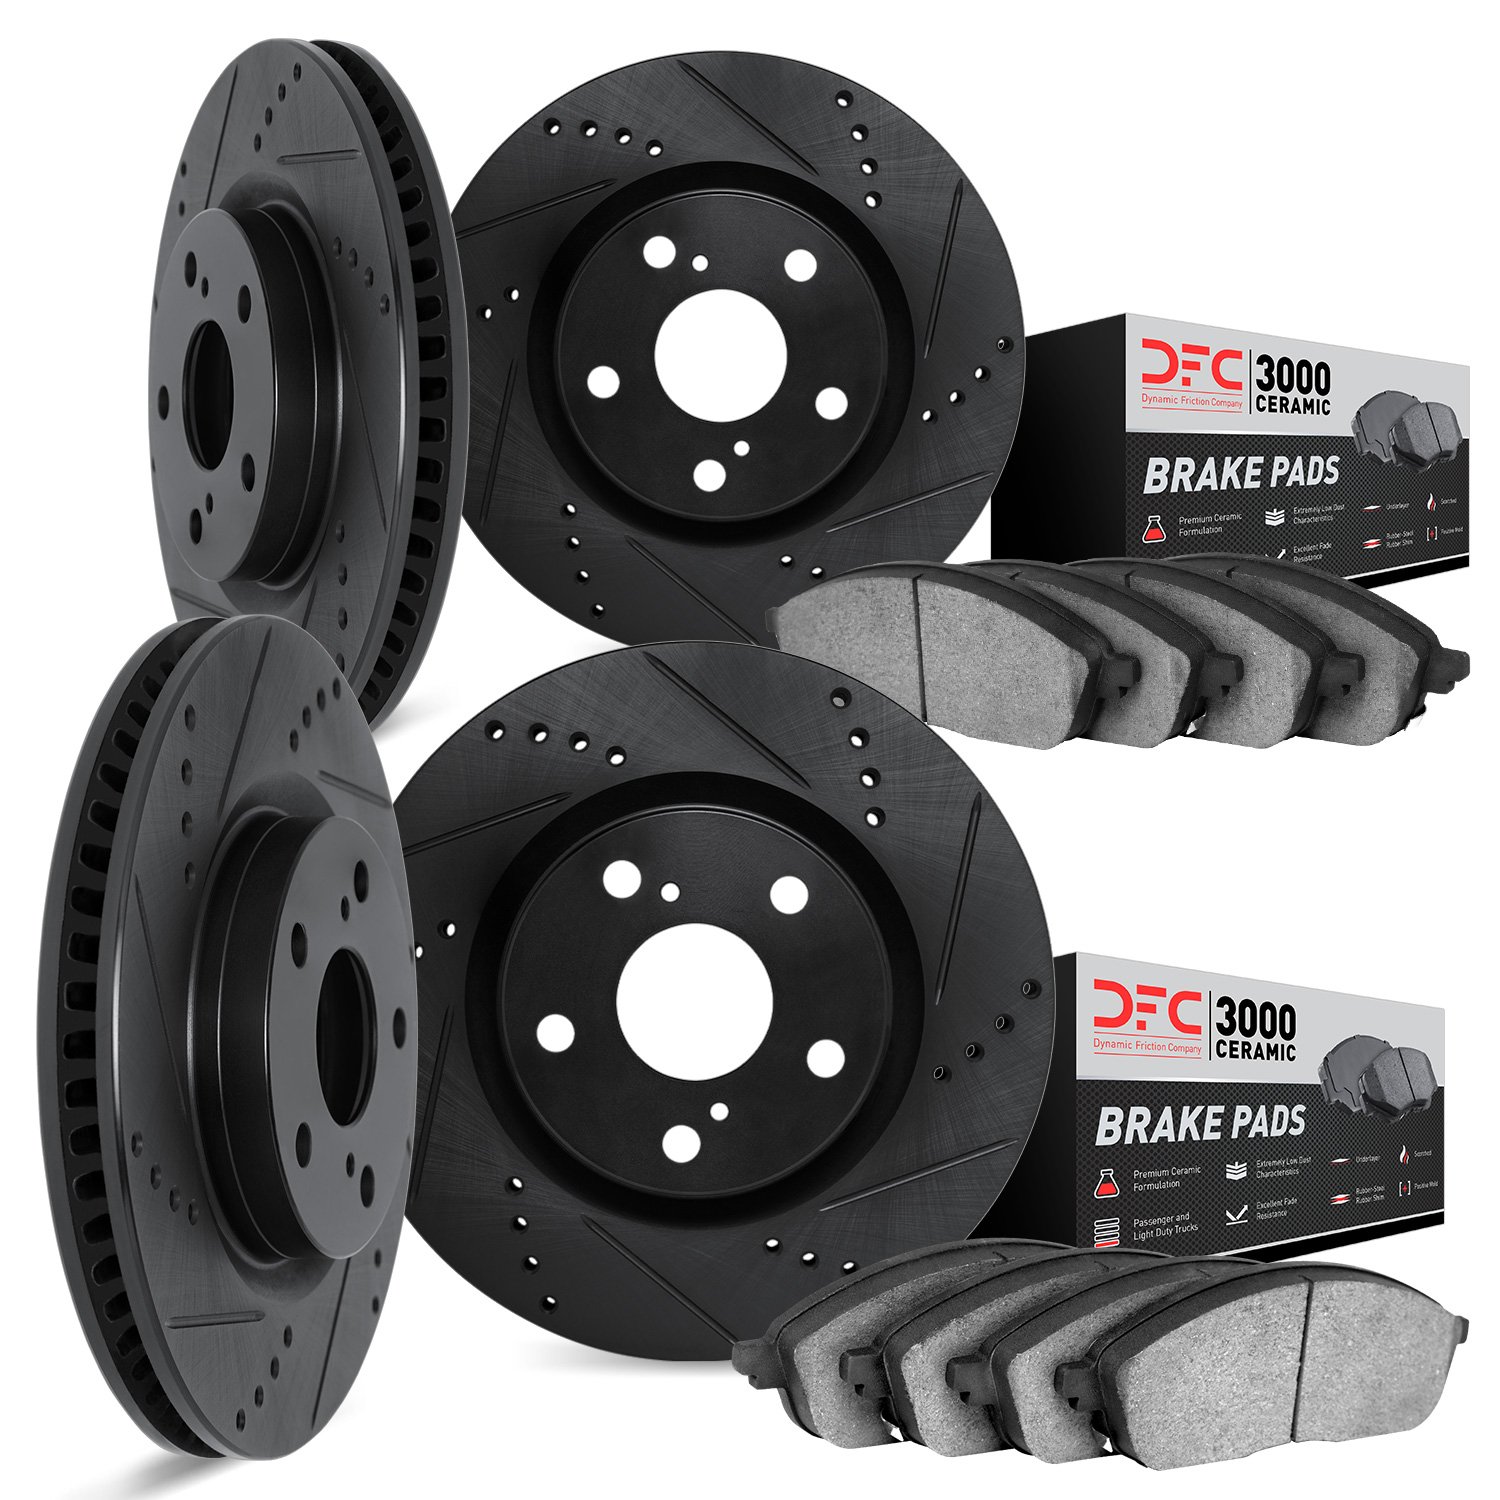 8304-31027 Drilled/Slotted Brake Rotors with 3000-Series Ceramic Brake Pads Kit [Black], 1996-2005 BMW, Position: Front and Rear